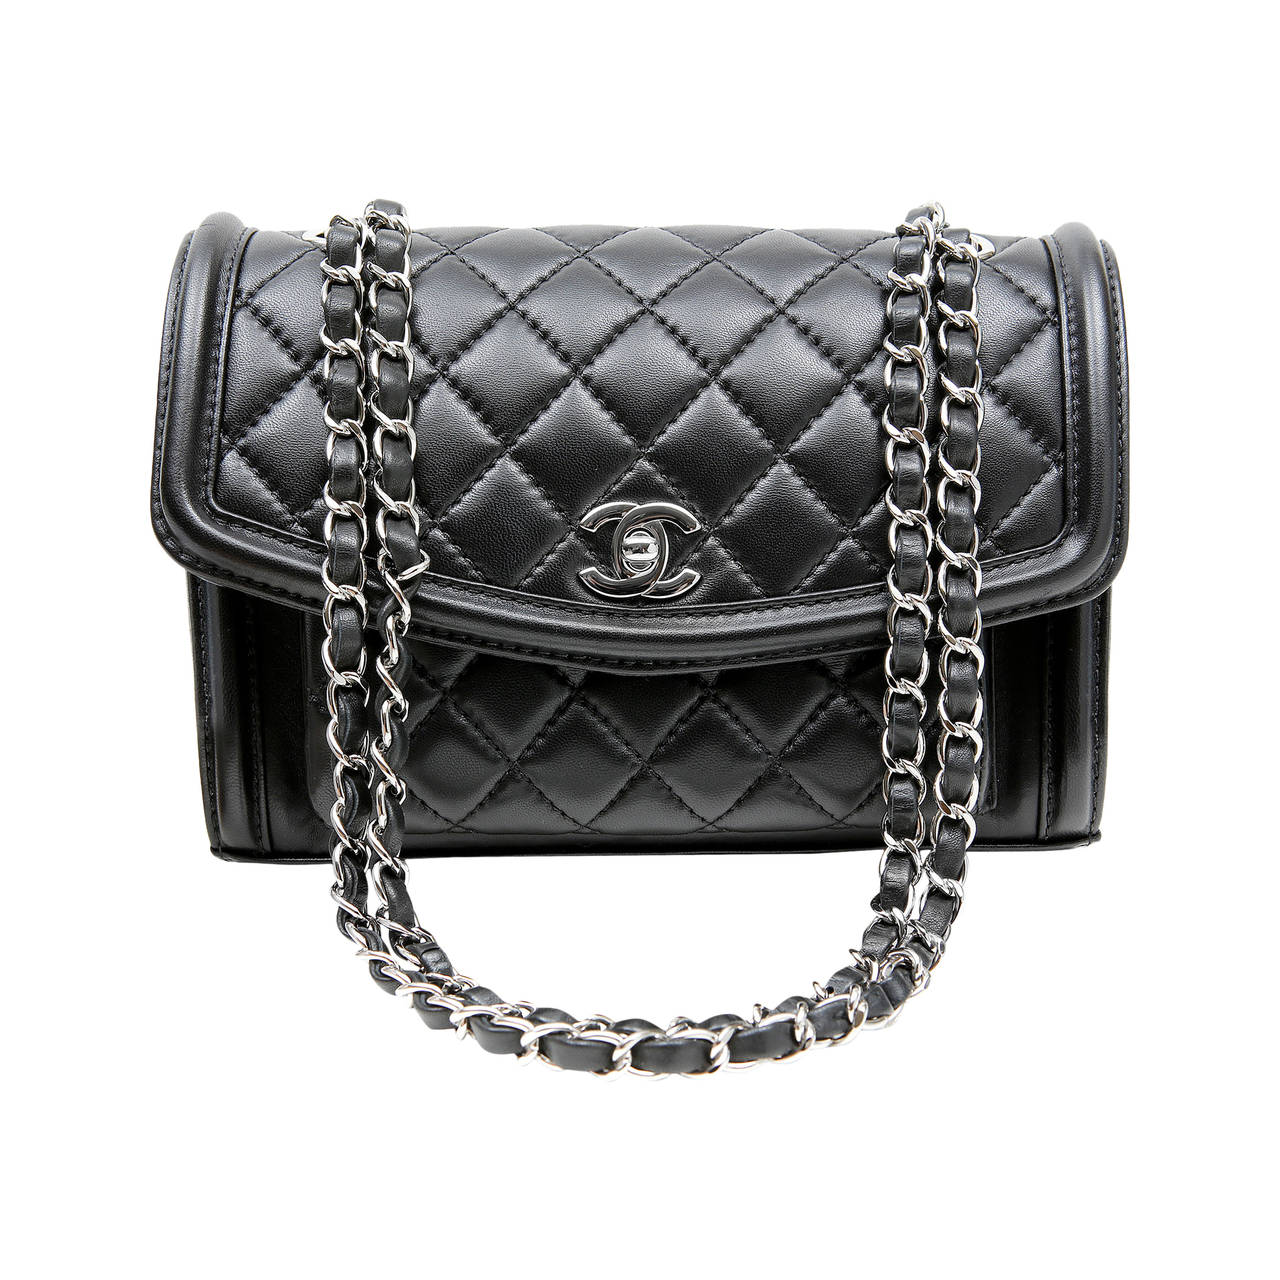 WOULD U BUY A CHANEL BAG WITHOUT A HOLOGRAM STICKER?